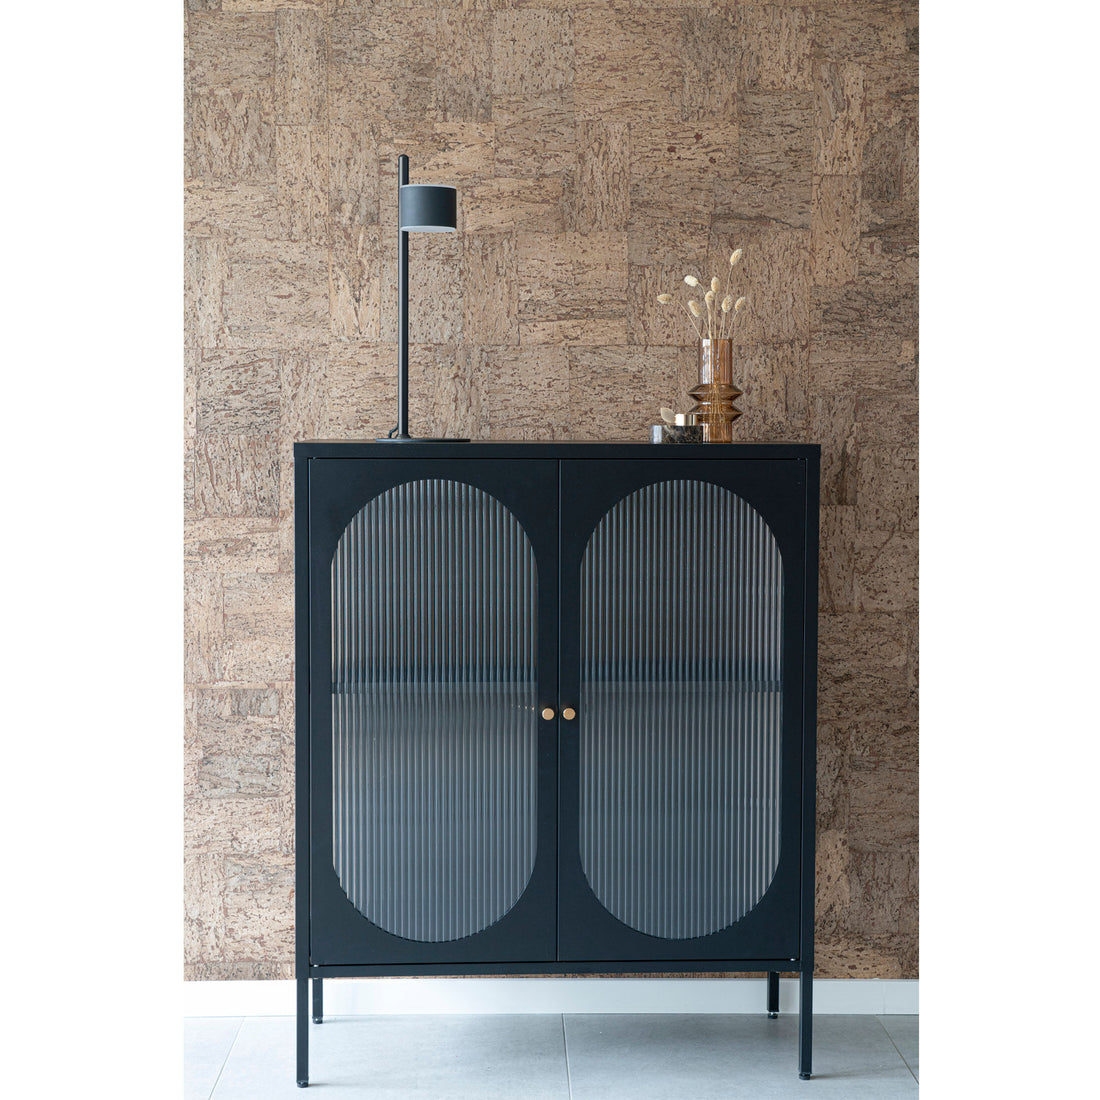 Adelaide display cabinet - display cabinet in black with rifled glass door 35x90x110 cm - 1 - pcs